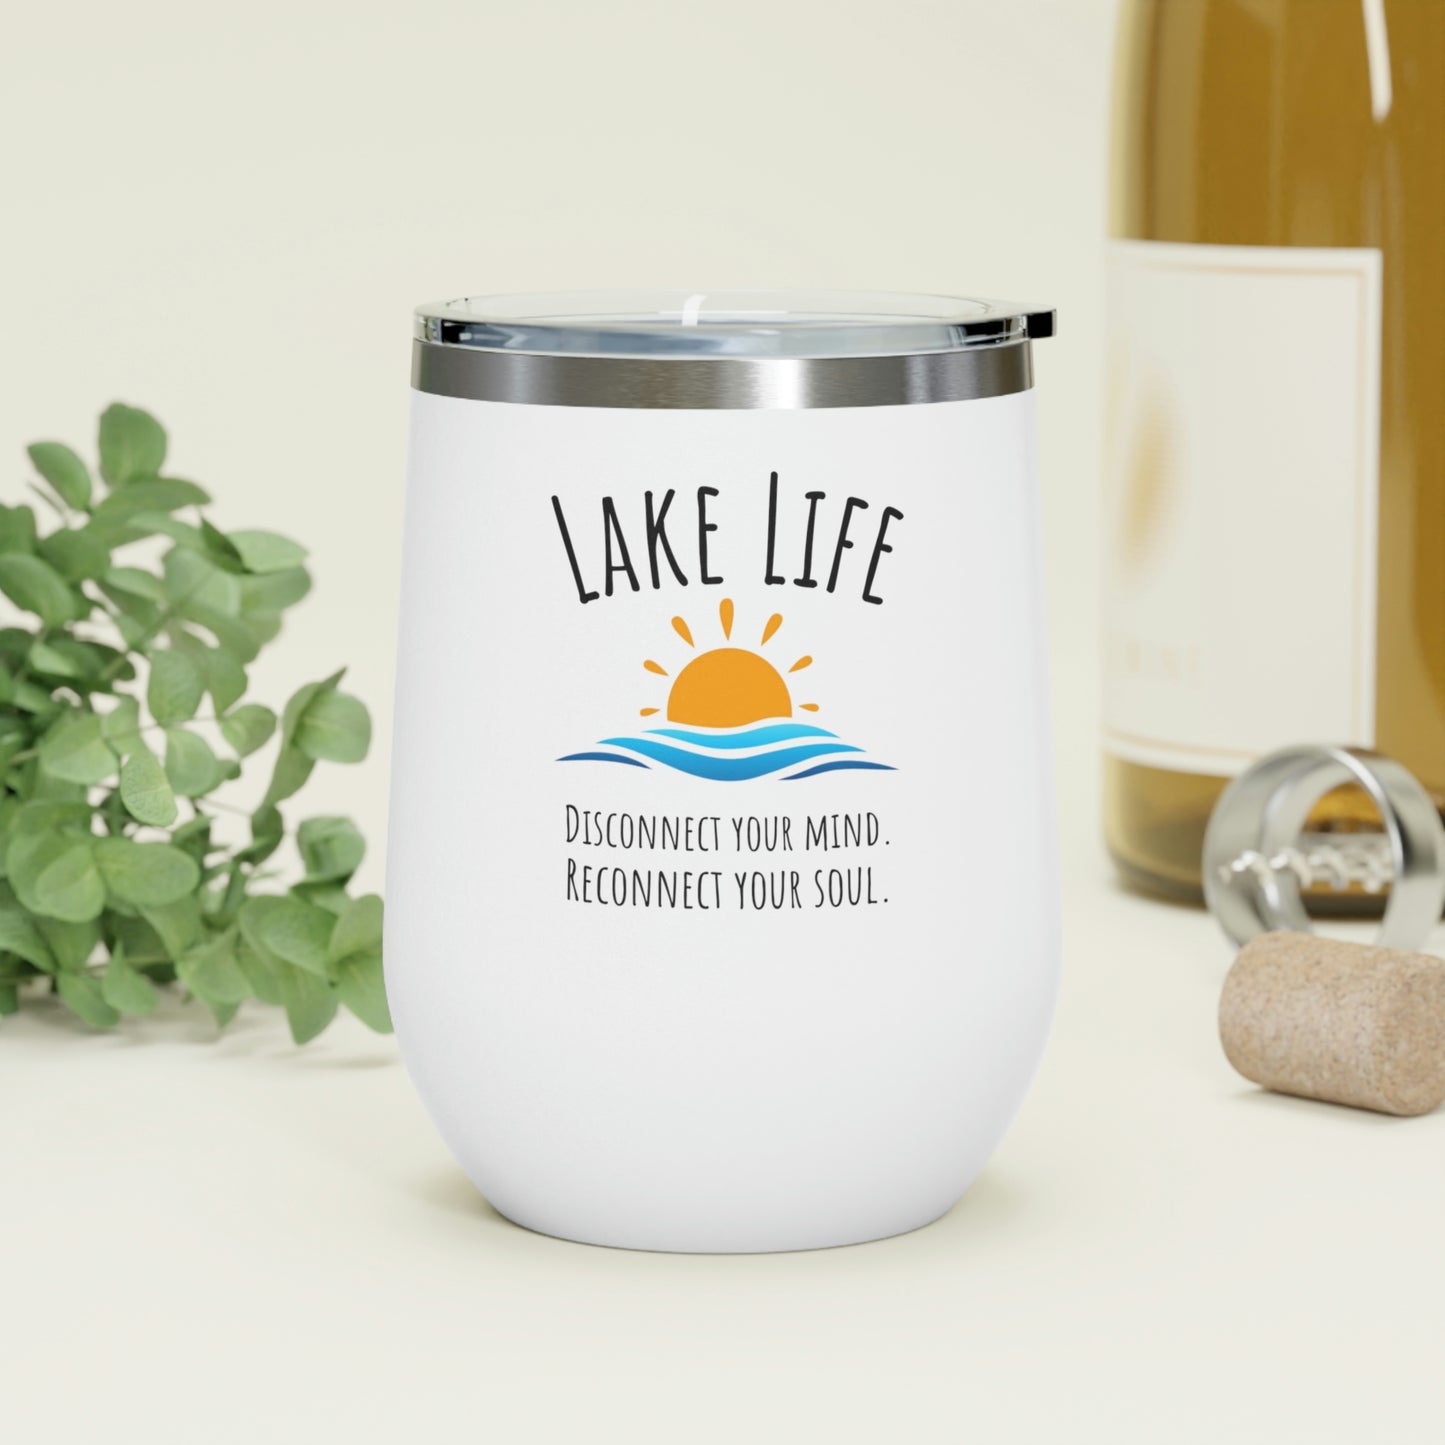 Lake Life - Disconnect your mind. Reconnect your soul. 12oz Insulated Wine Tumbler